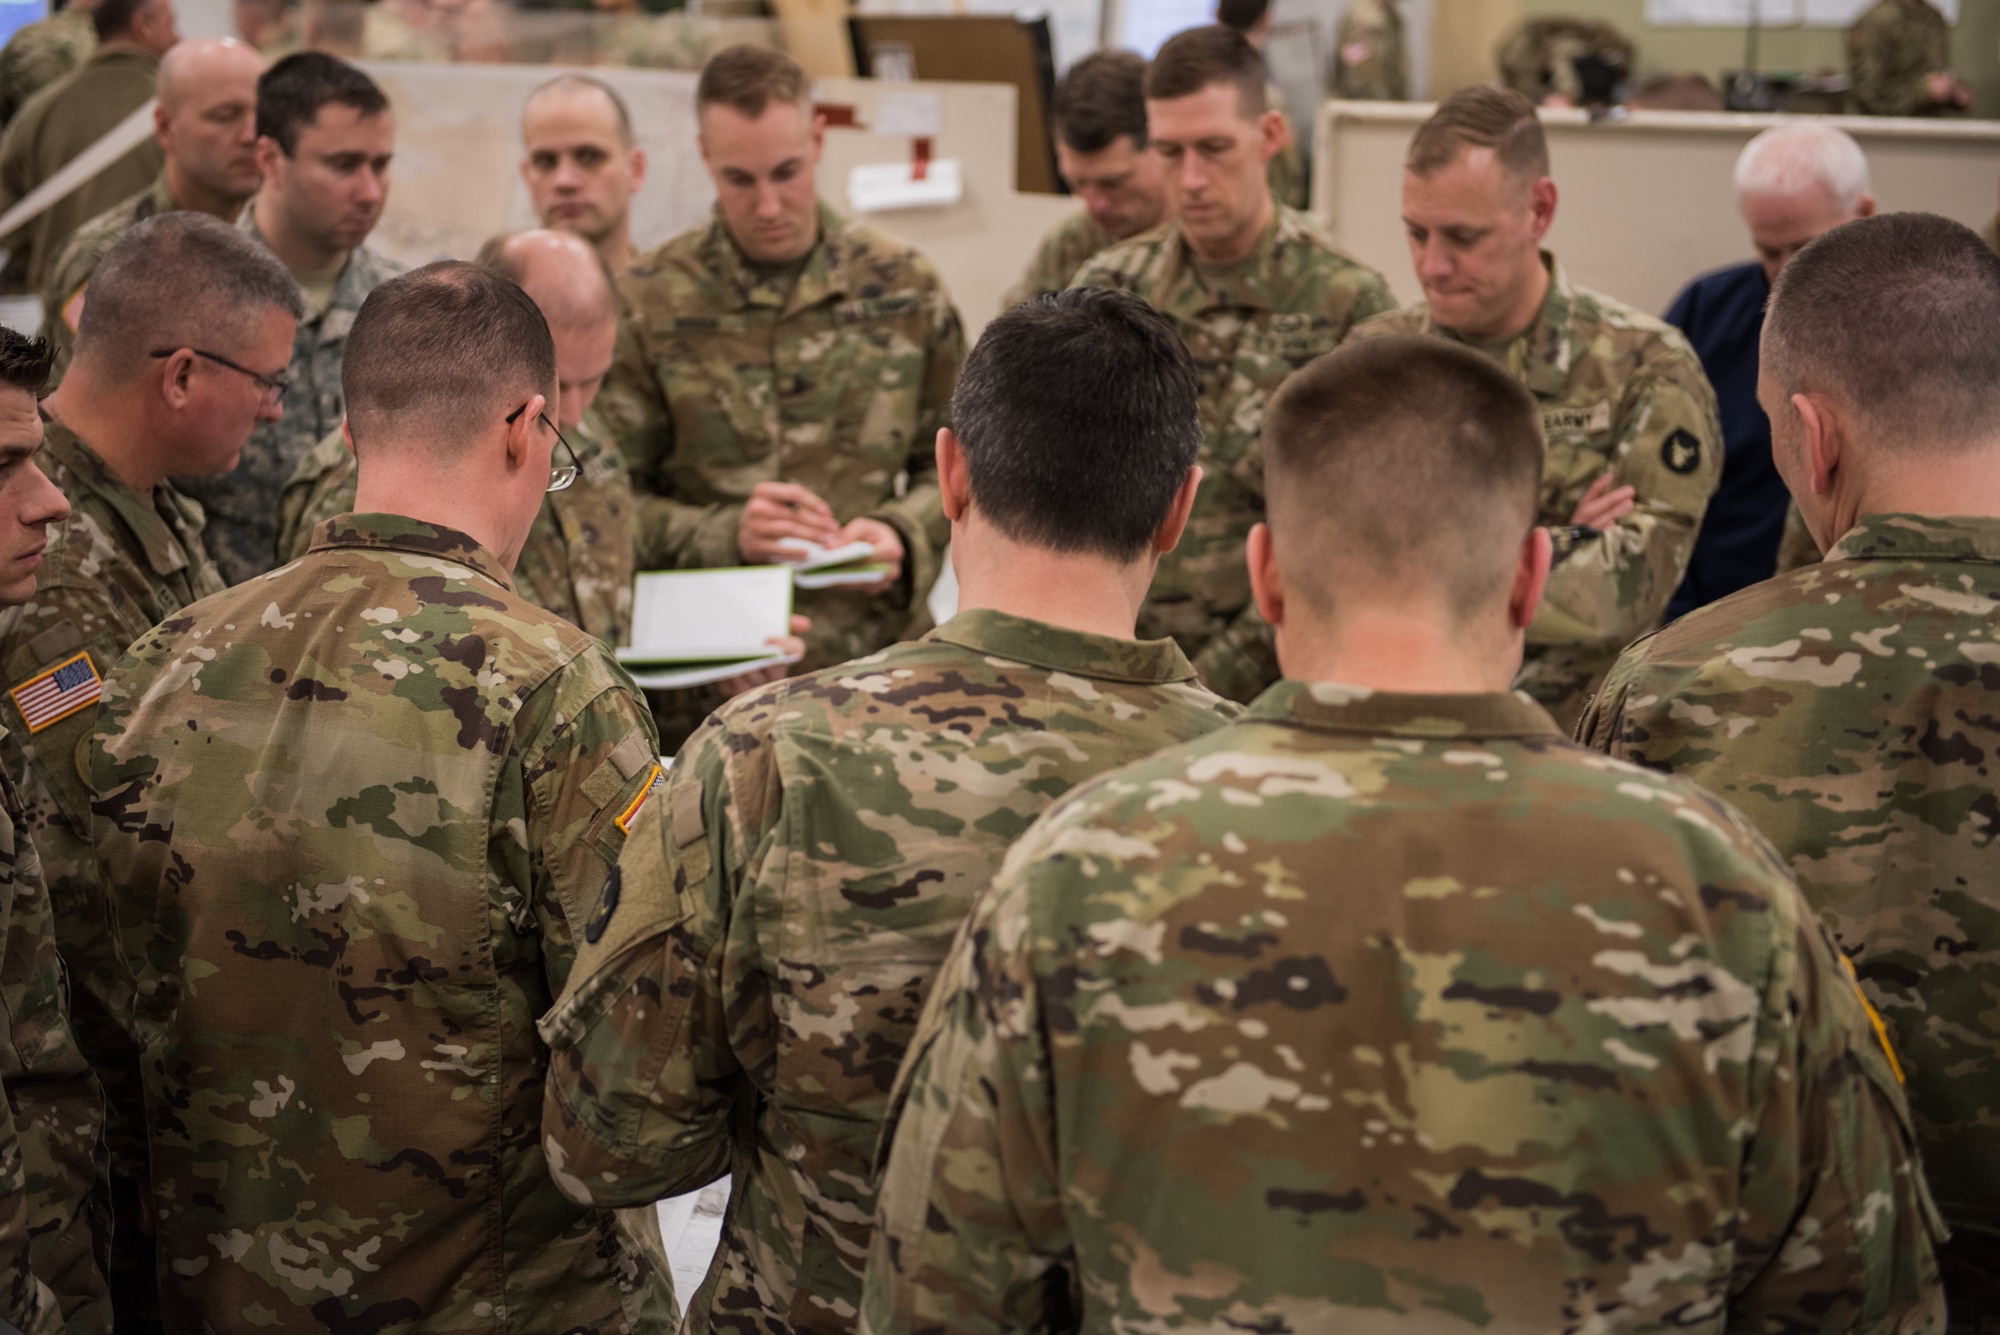 Members of the Minnesota Army National Guard Armored Brigade Combat Team, 34th Infantry Division (1/34th ABCT), look over a map as the 1/34th ABCT commander, Col. Timothy Kemp, reviews his battle plan during the 19-05 Command Post Exercise (CPX) for the Minnesota Army National Guard Armored Brigade Combat Team, 34th Infantry Division (1/34th ABCT), March 8-9, 2019, at Camp Ripley in Little Falls, Minn. The CPX was a practice virtual battle exercise for the brigade to practice their battle drills, and the 146th ASOS will continue partnering with the 1/34th ABCT later in the year to assist in a graded warfighter exercise, as well as other trainings next year. (U.S. Air National Guard photo by Staff Sgt. Brigette Waltermire)